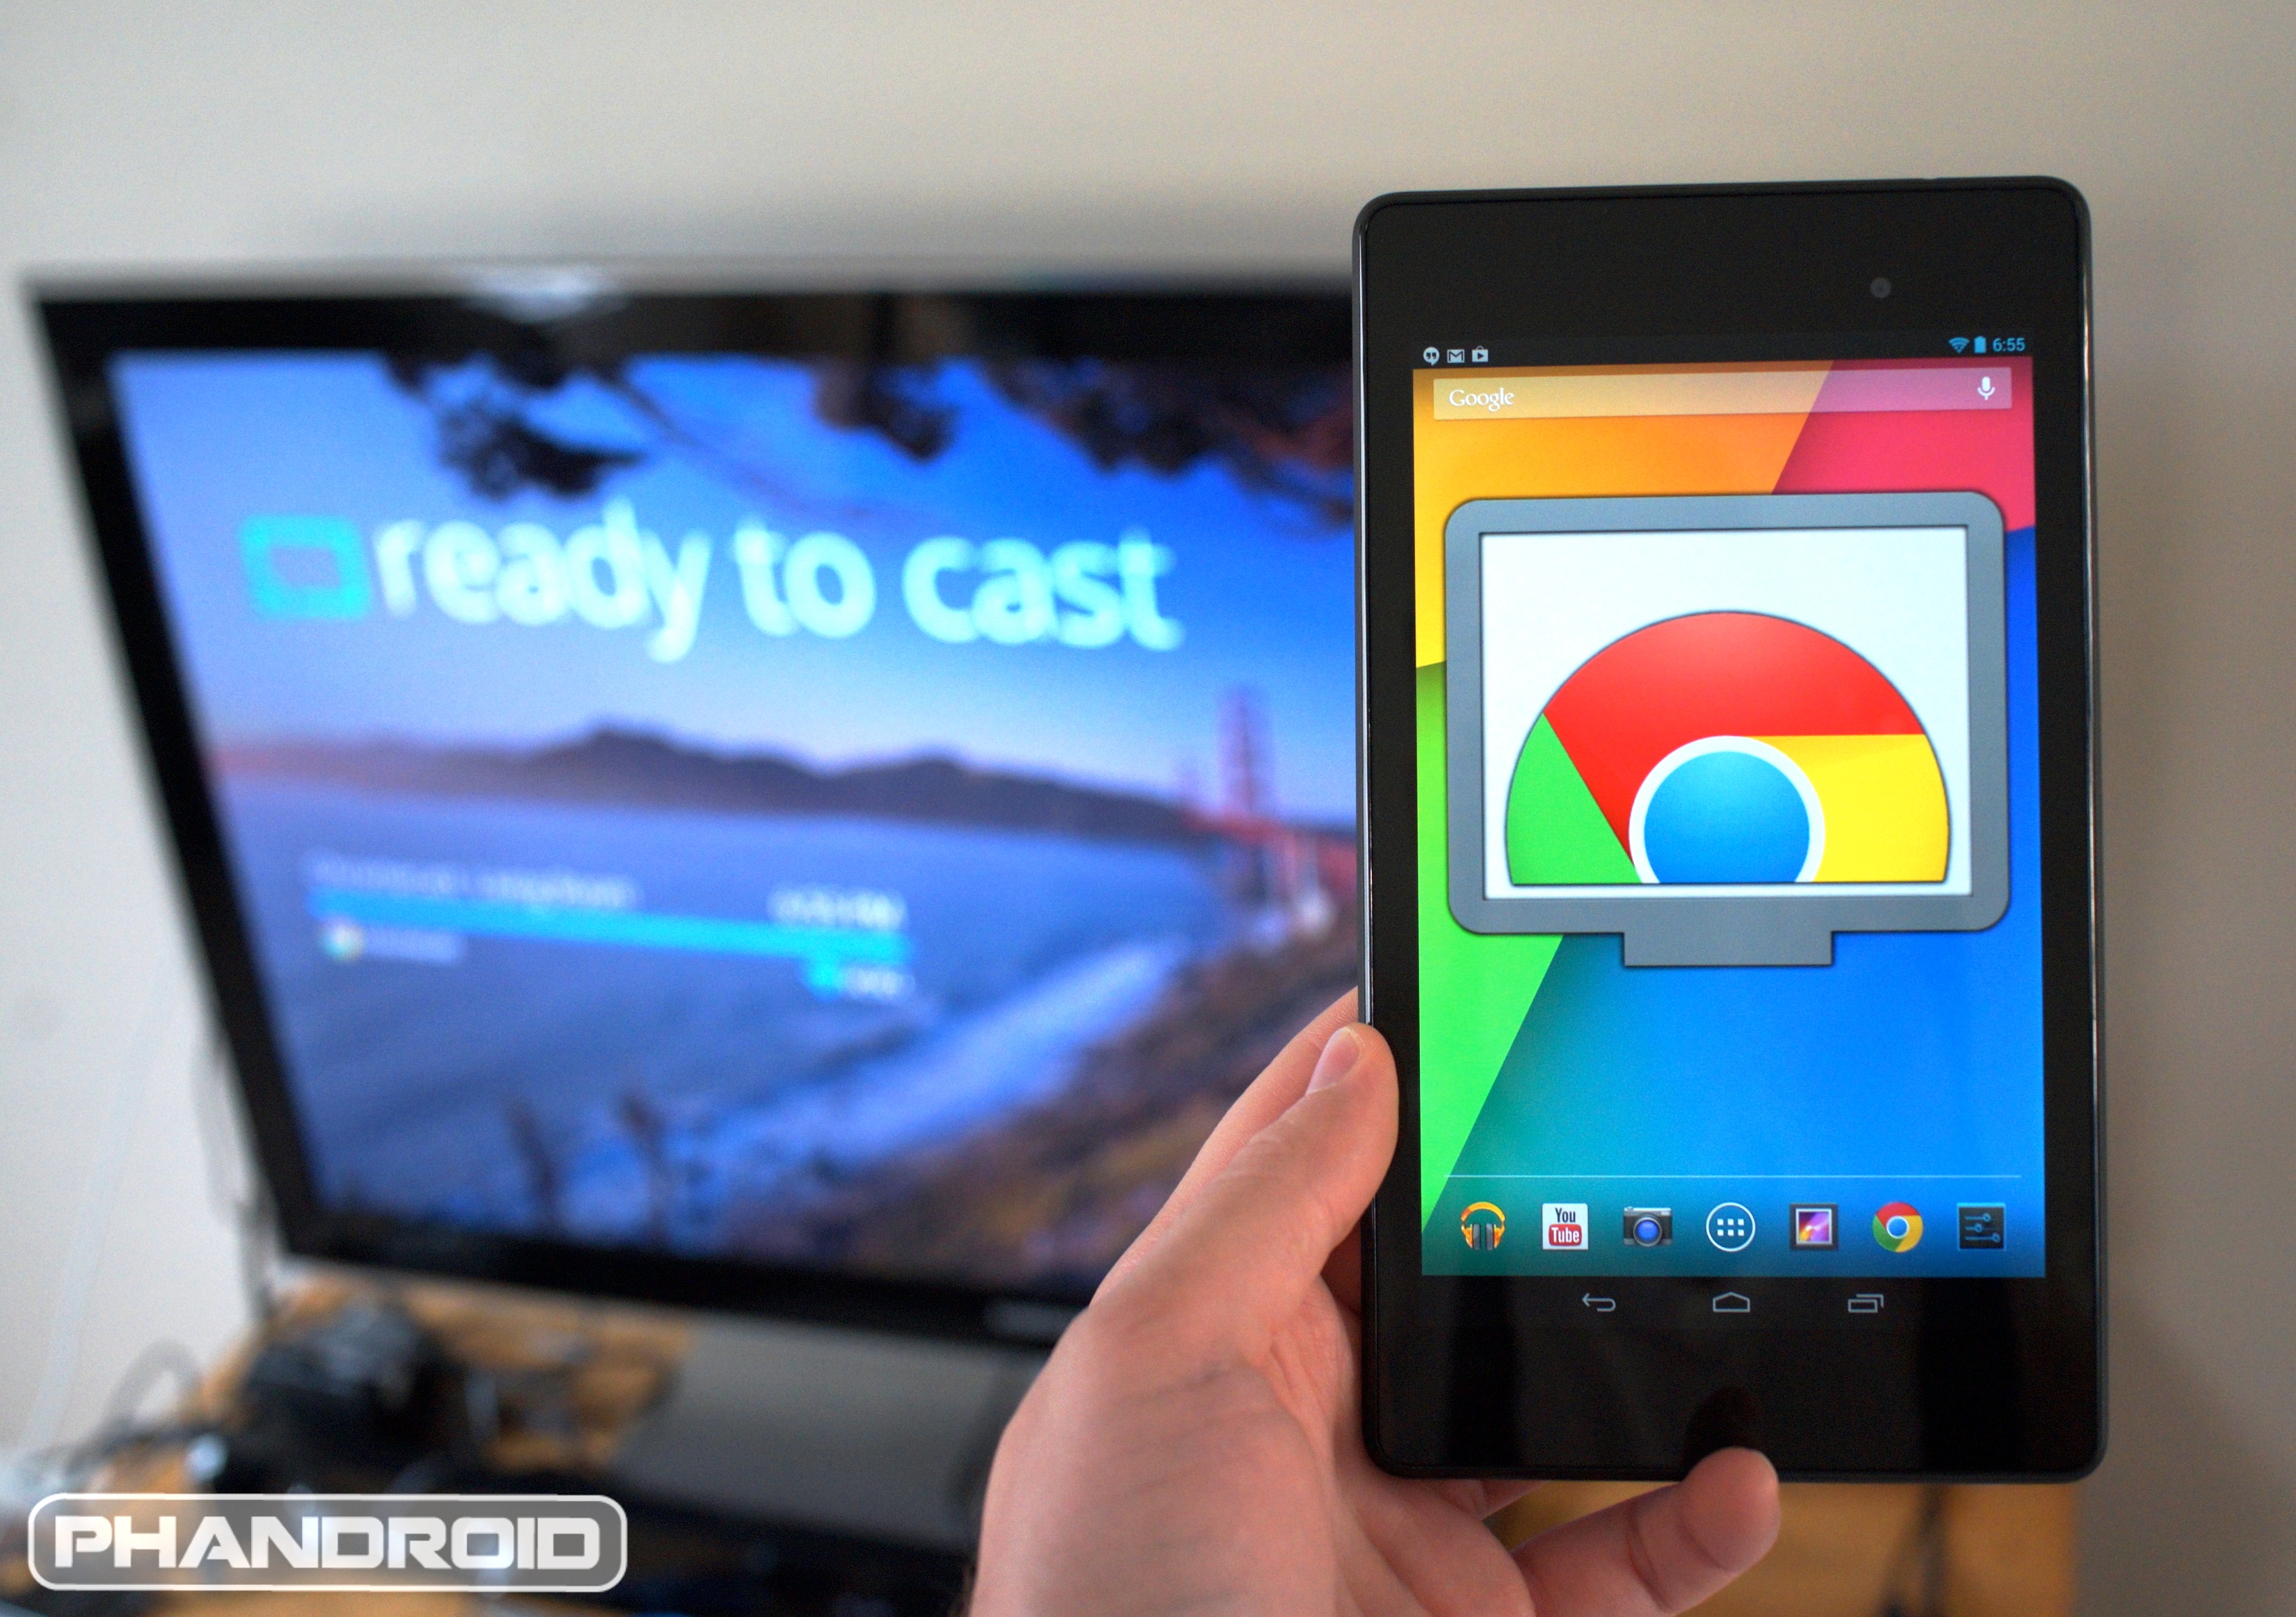 Chromecast support comes HBO NOW, Catch Phrase, Food Network and more – Phandroid